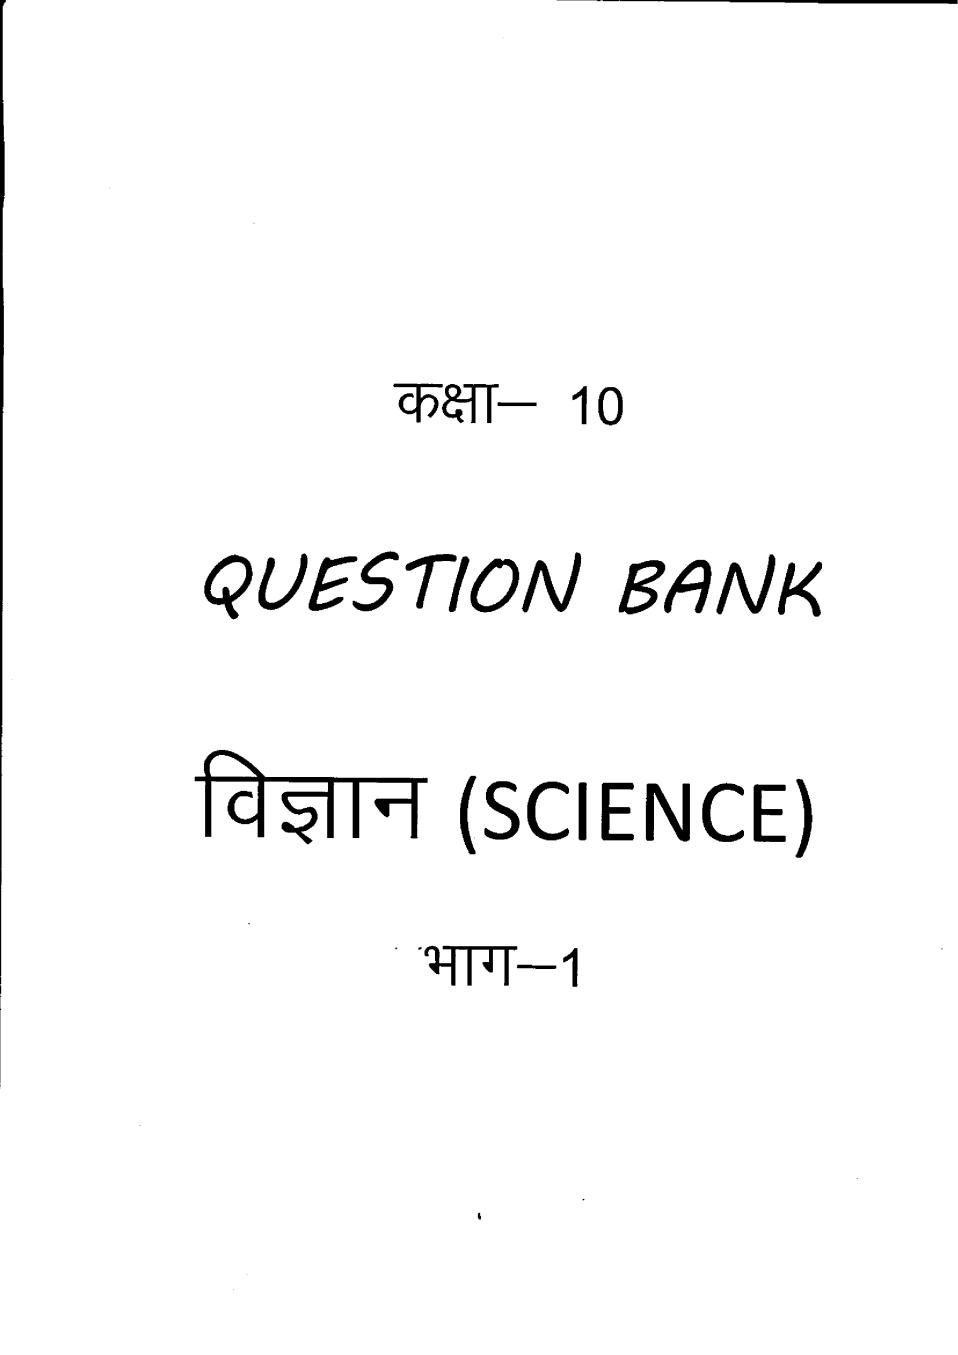 Uttarakhand Board Class 10 Question Bank Science - Page 1